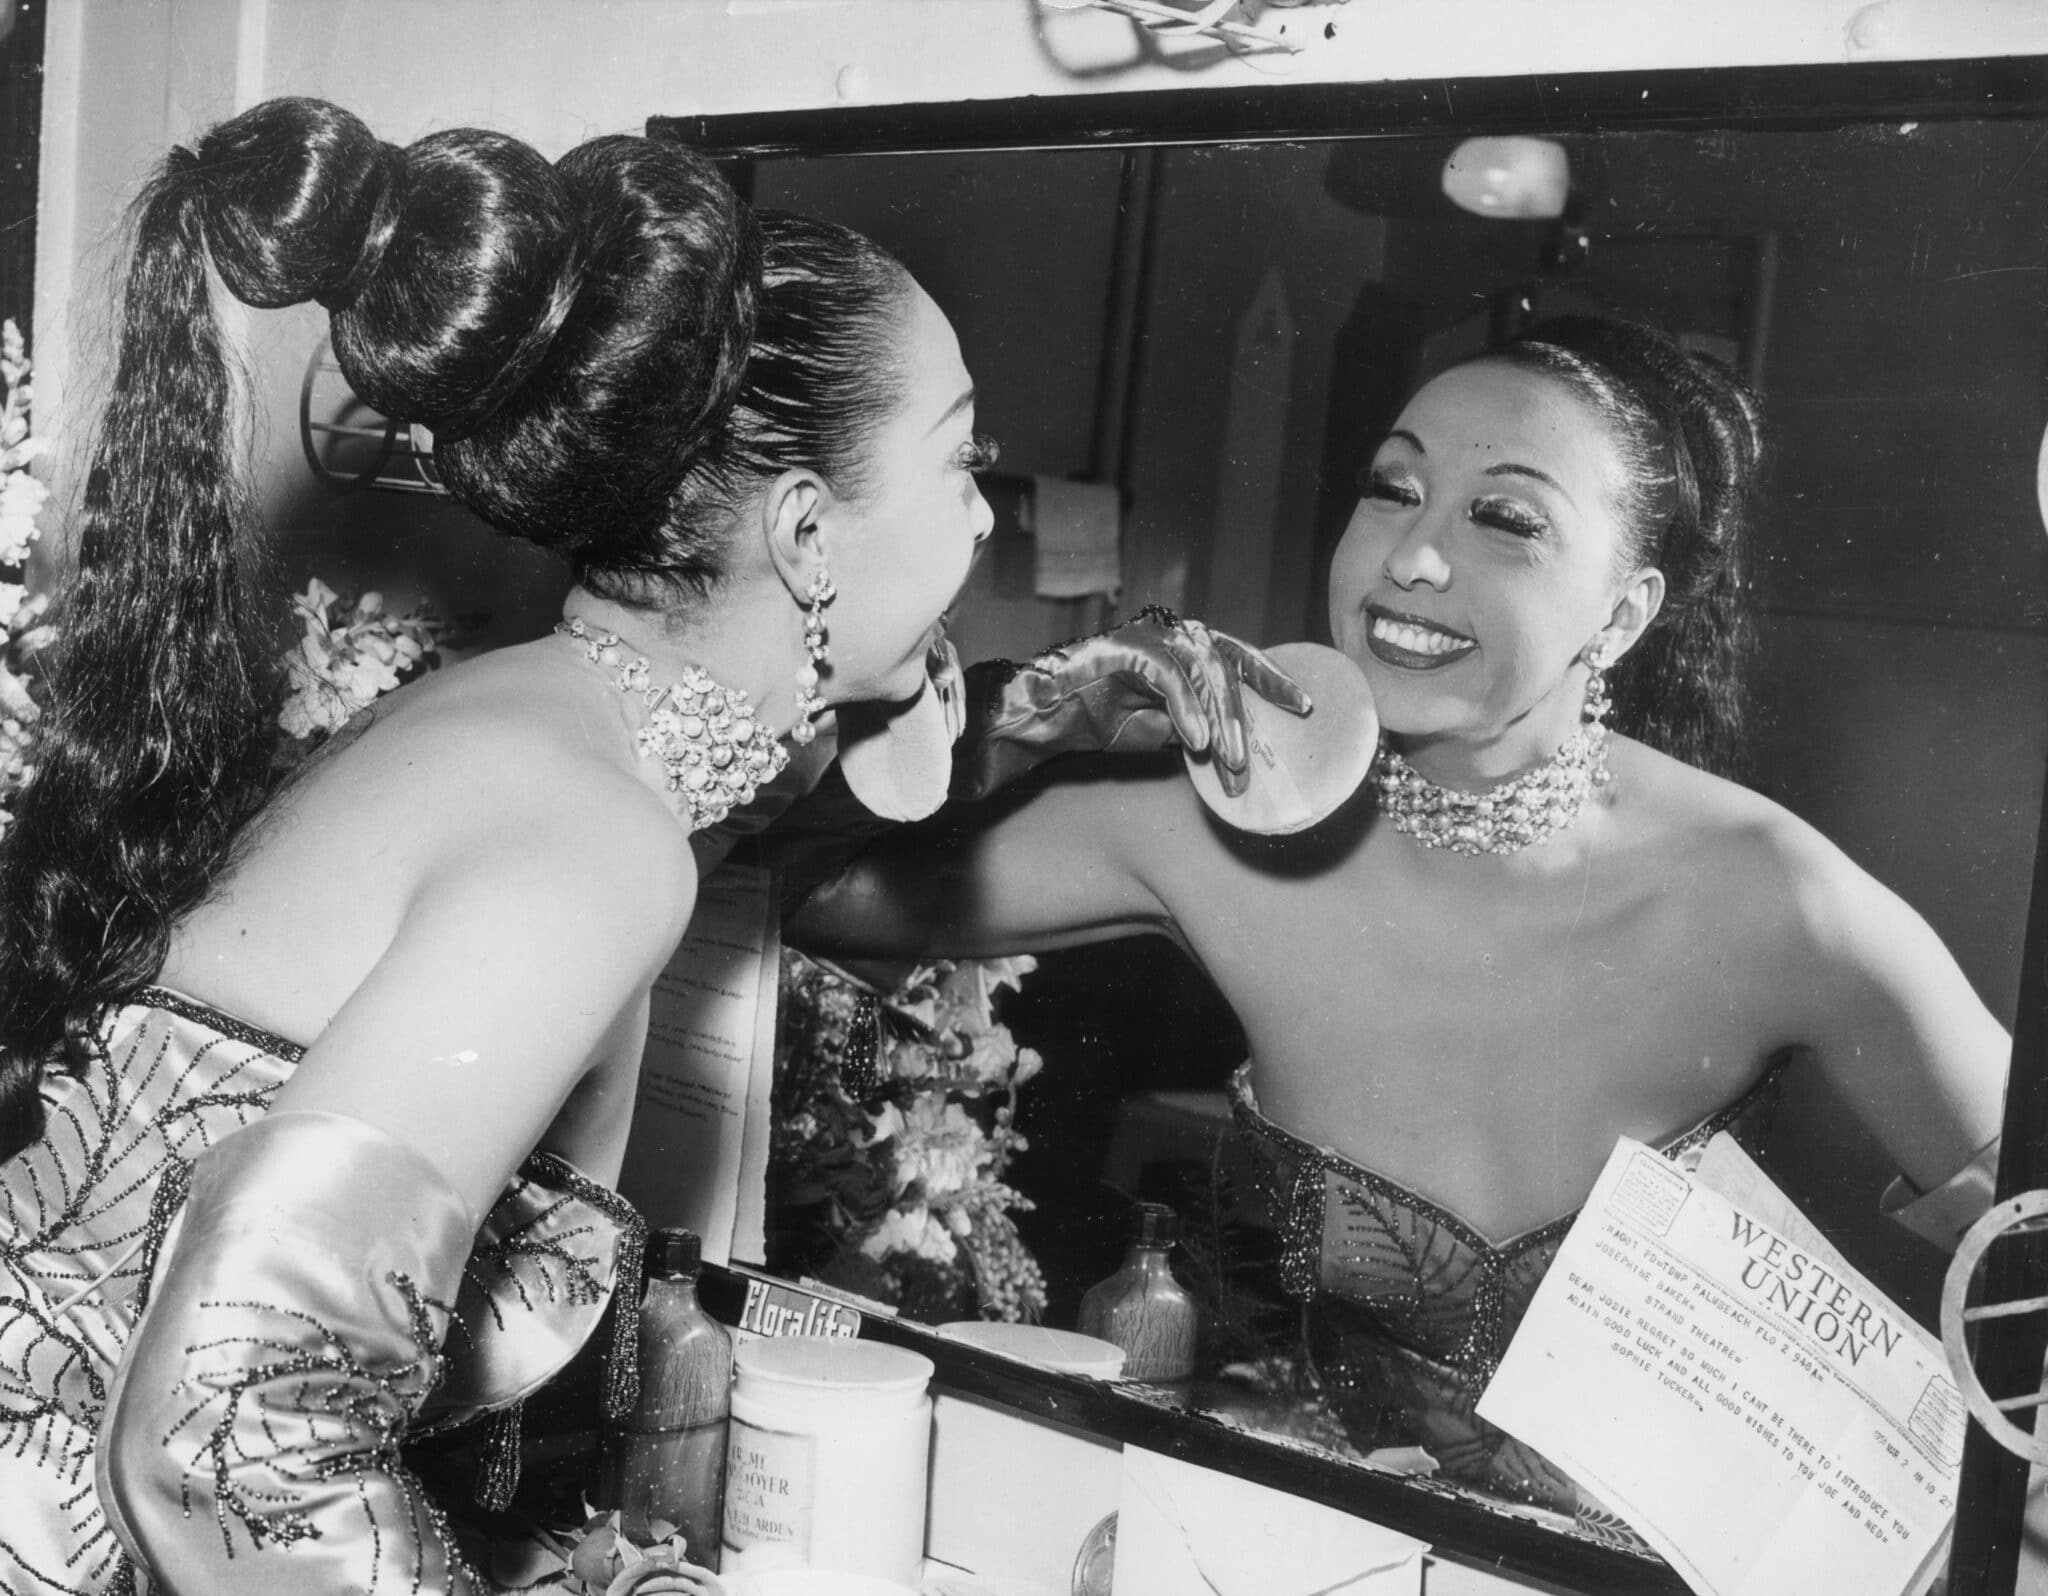 Josephine Baker to be the first Black woman to enter the Pantheon